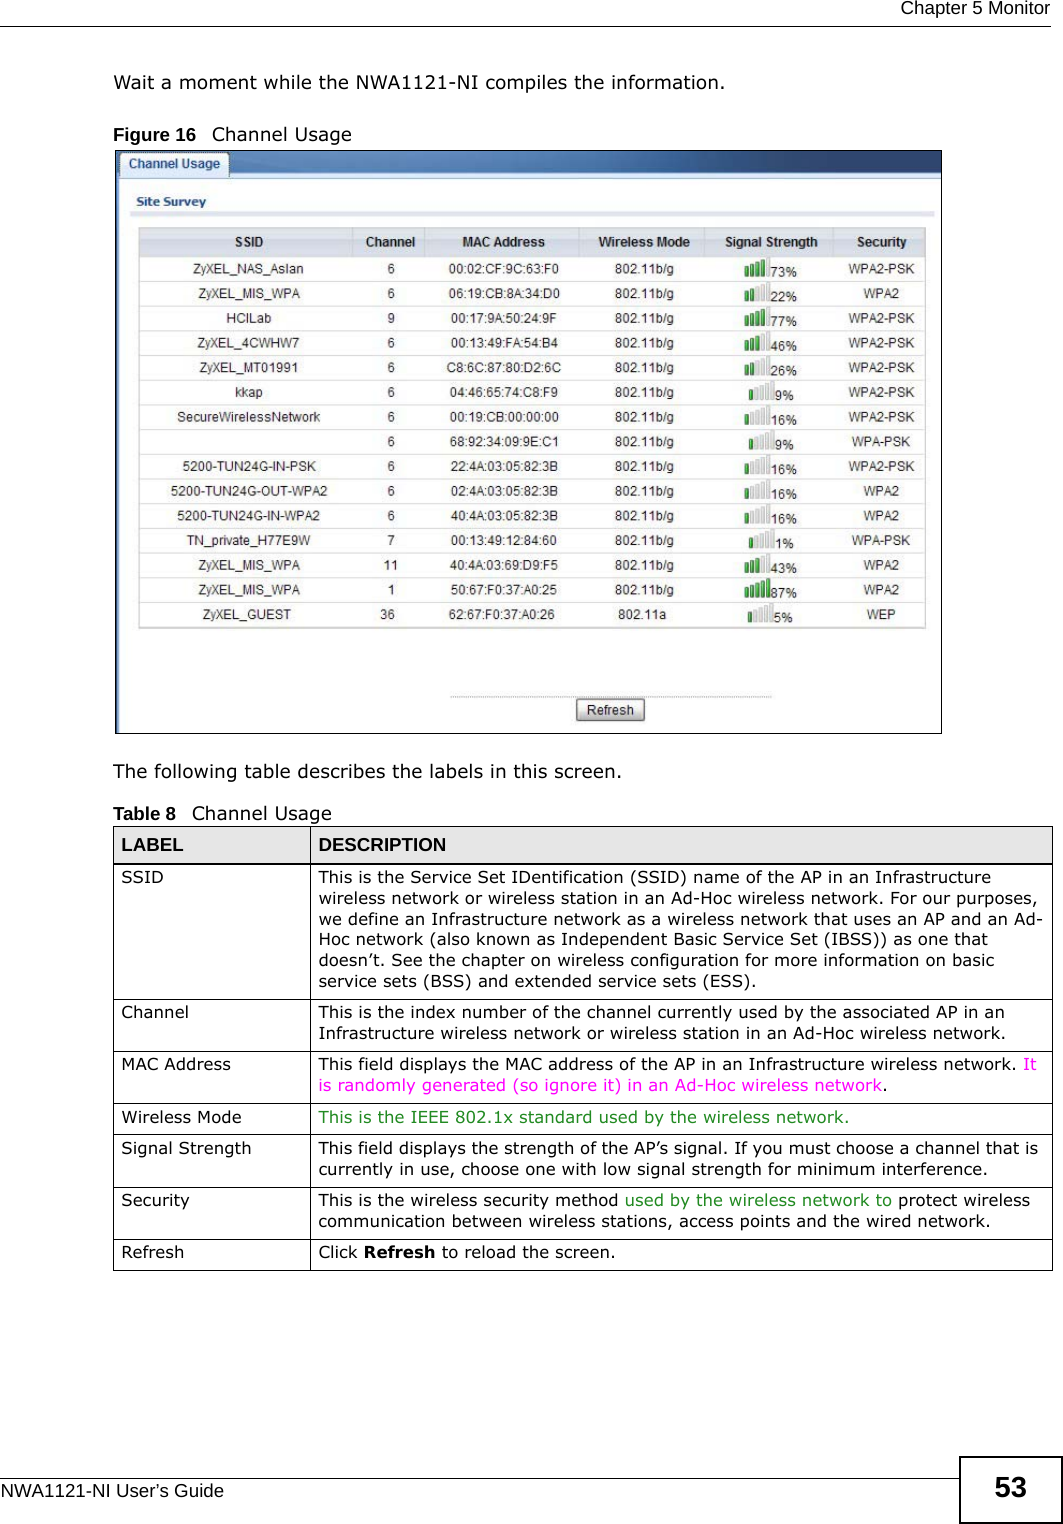  Chapter 5 MonitorNWA1121-NI User’s Guide 53Wait a moment while the NWA1121-NI compiles the information.Figure 16   Channel Usage The following table describes the labels in this screen.Table 8   Channel UsageLABEL DESCRIPTIONSSID This is the Service Set IDentification (SSID) name of the AP in an Infrastructure wireless network or wireless station in an Ad-Hoc wireless network. For our purposes, we define an Infrastructure network as a wireless network that uses an AP and an Ad-Hoc network (also known as Independent Basic Service Set (IBSS)) as one that doesn’t. See the chapter on wireless configuration for more information on basic service sets (BSS) and extended service sets (ESS).Channel This is the index number of the channel currently used by the associated AP in an Infrastructure wireless network or wireless station in an Ad-Hoc wireless network.MAC Address This field displays the MAC address of the AP in an Infrastructure wireless network. It is randomly generated (so ignore it) in an Ad-Hoc wireless network.Wireless Mode This is the IEEE 802.1x standard used by the wireless network.Signal Strength This field displays the strength of the AP’s signal. If you must choose a channel that is currently in use, choose one with low signal strength for minimum interference.Security This is the wireless security method used by the wireless network to protect wireless communication between wireless stations, access points and the wired network.Refresh Click Refresh to reload the screen.